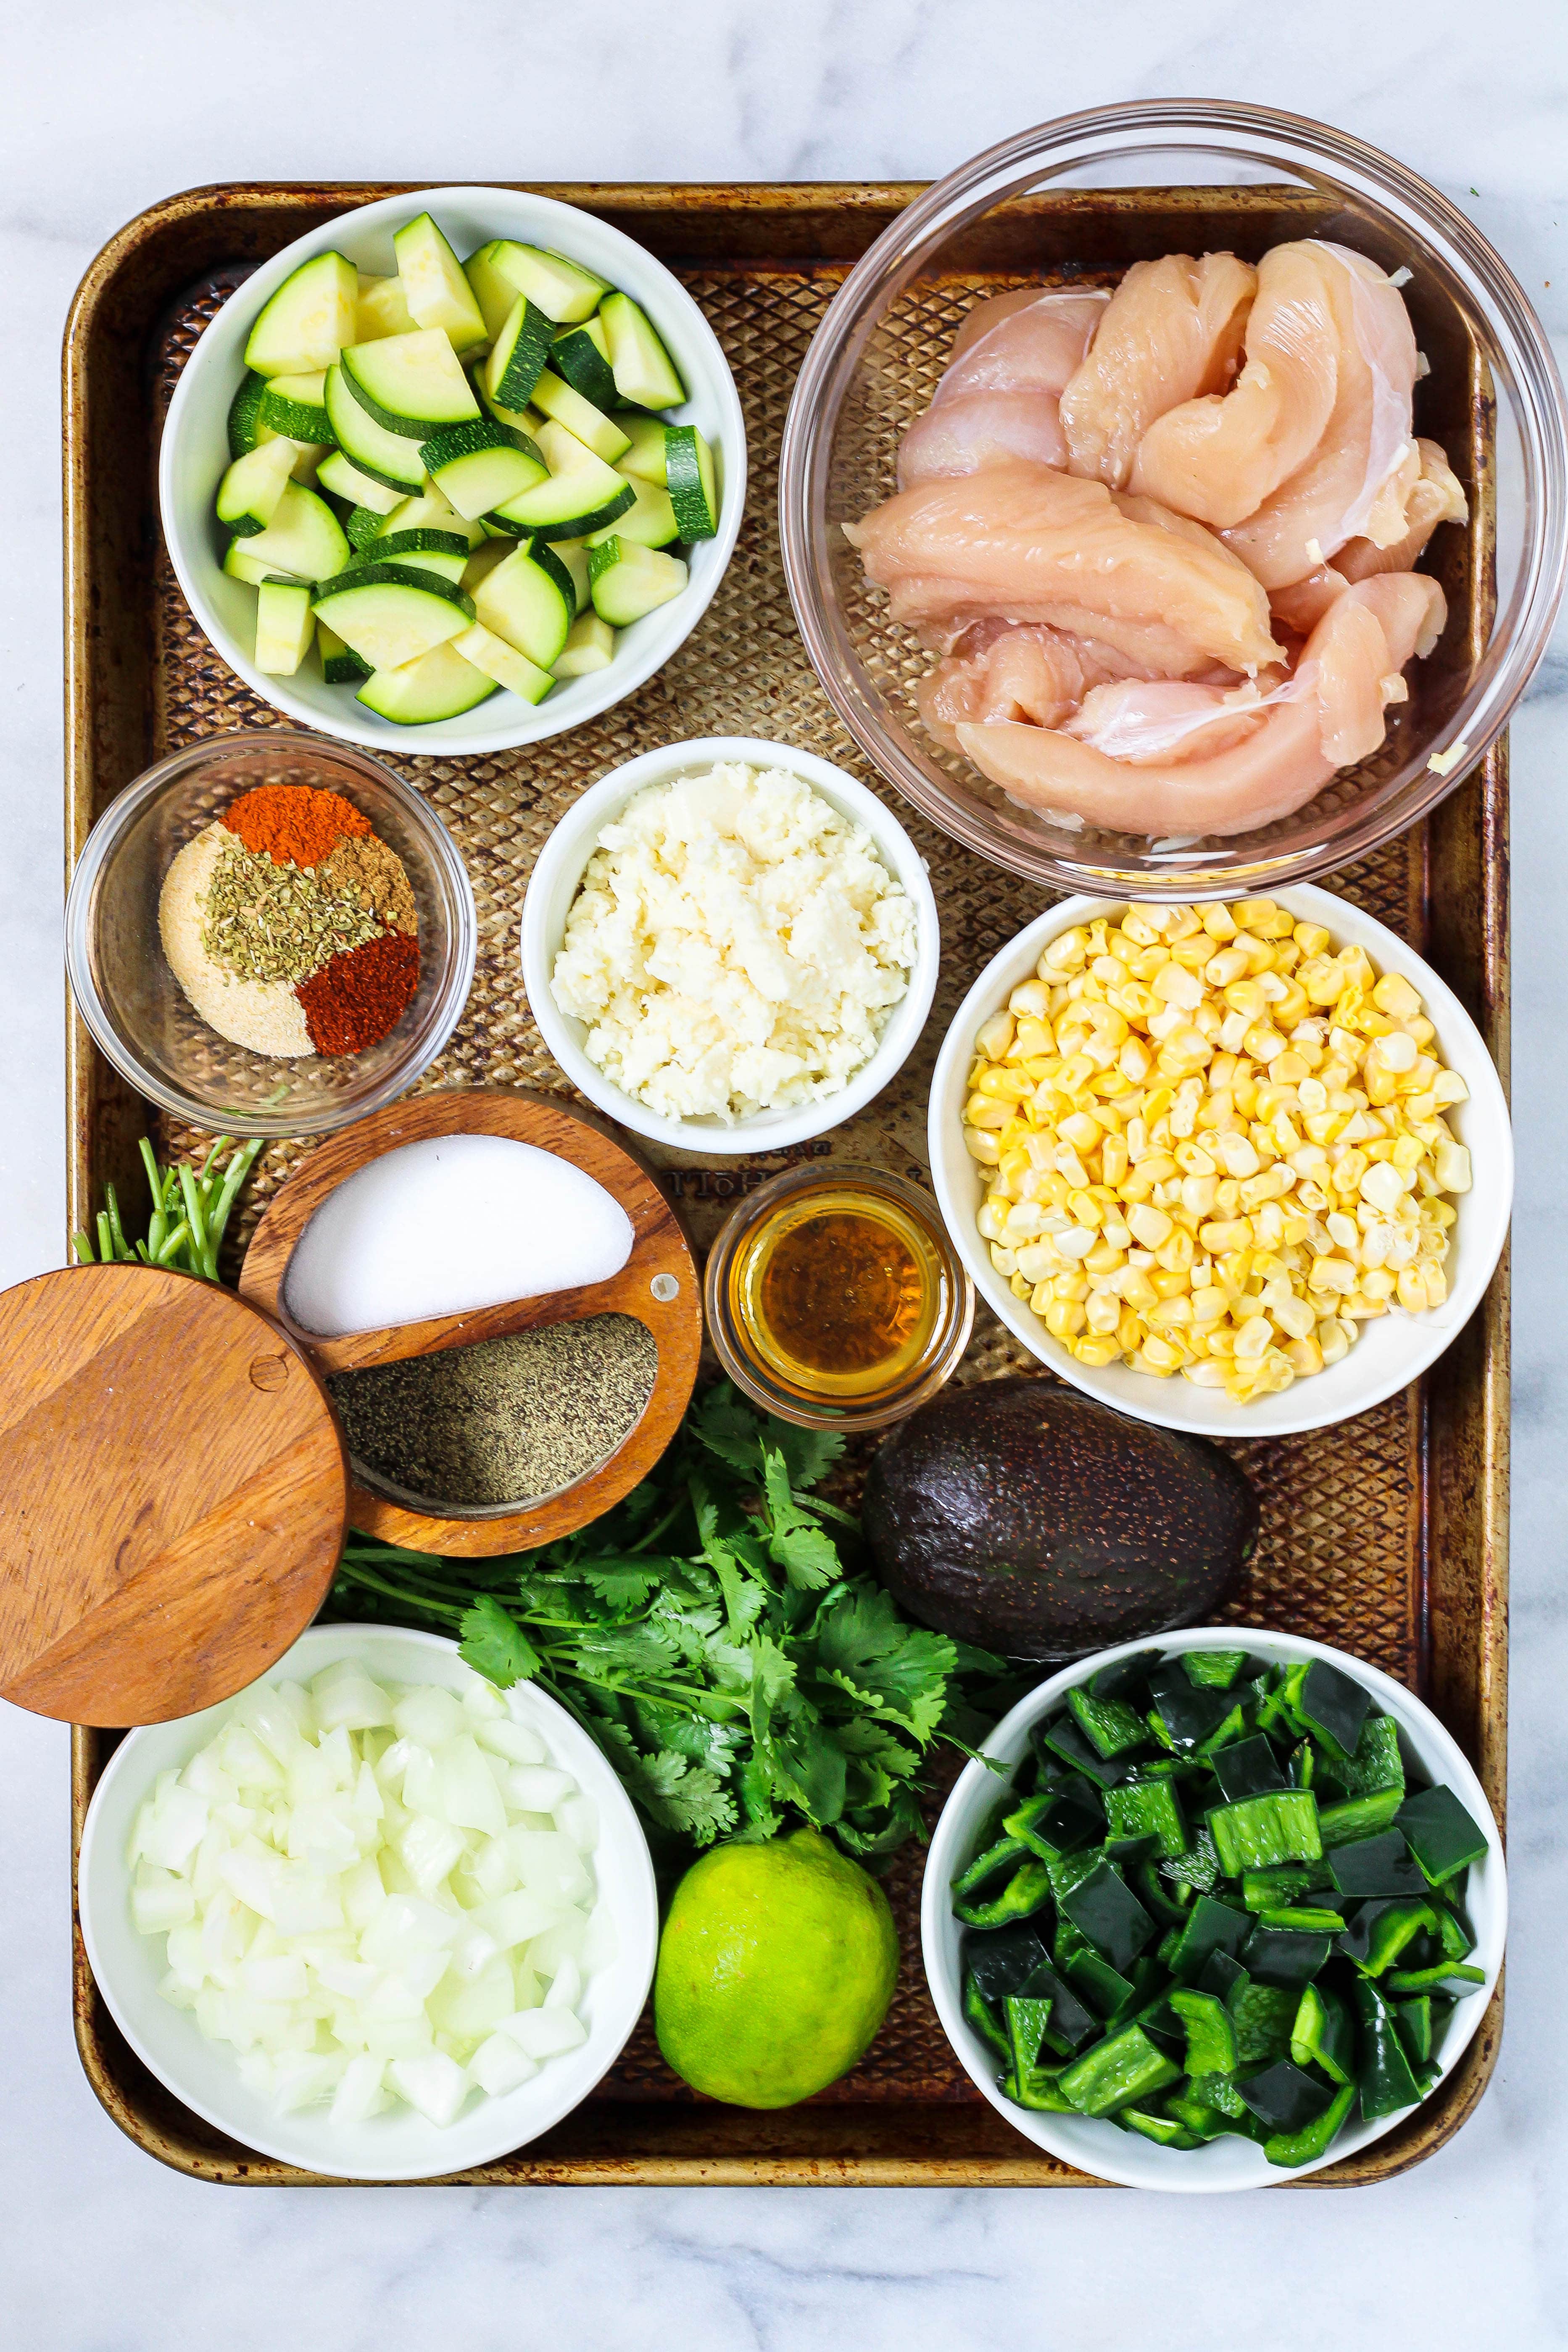 Ingredients to Make Sheet Pan Poblano Corn Salad with Chicken